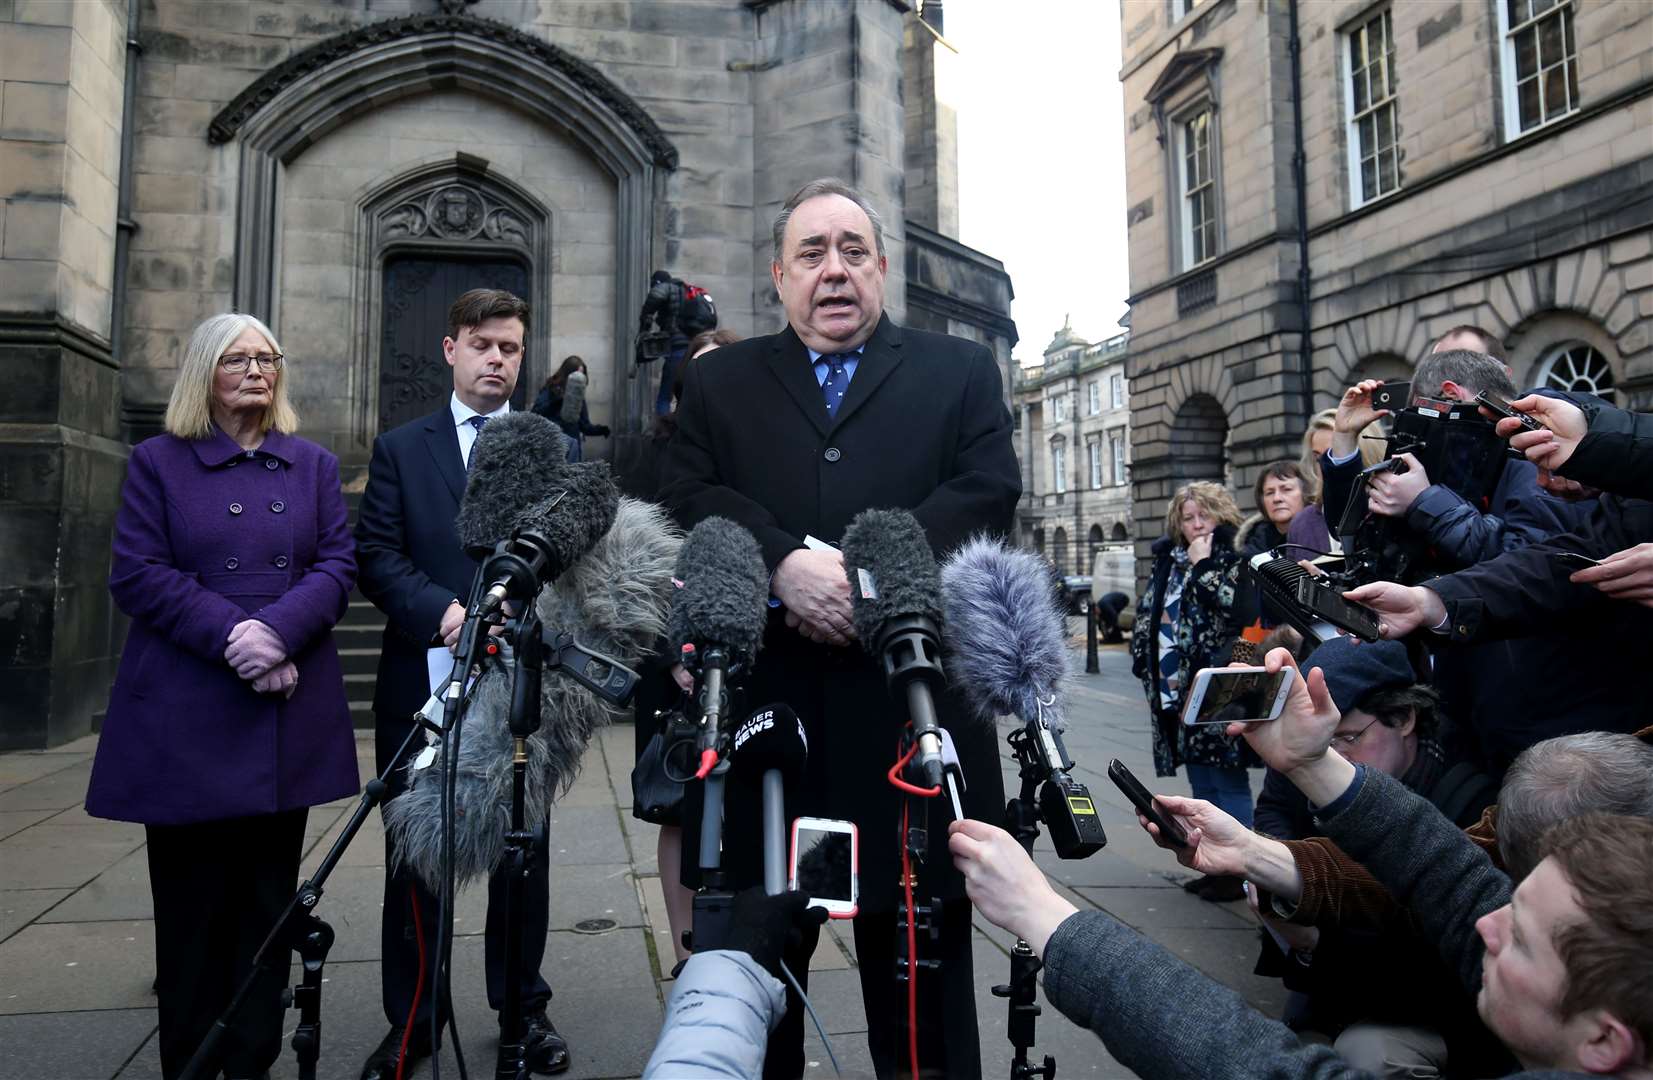 Alex Salmond speaking outside the Court of Session in Edinburgh after it ruled that the Scottish Government acted unlawfully regarding sexual harassment complaints against the former first minister (Jane Barlow/PA)